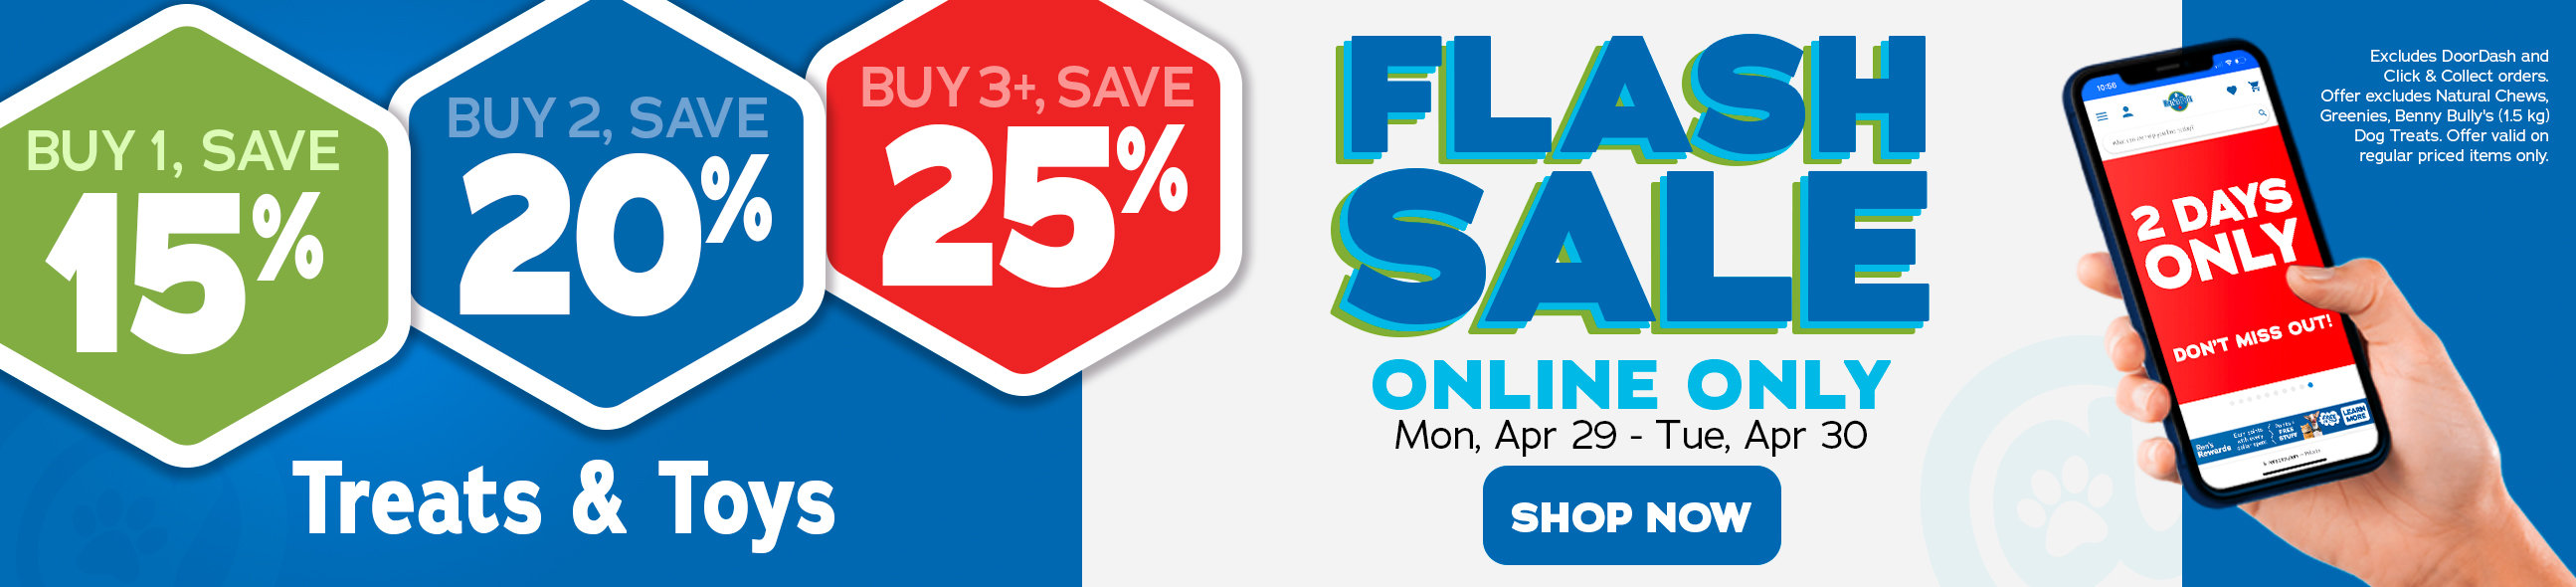 Buy more save more on treats and toys - Online only flash sale - shop now